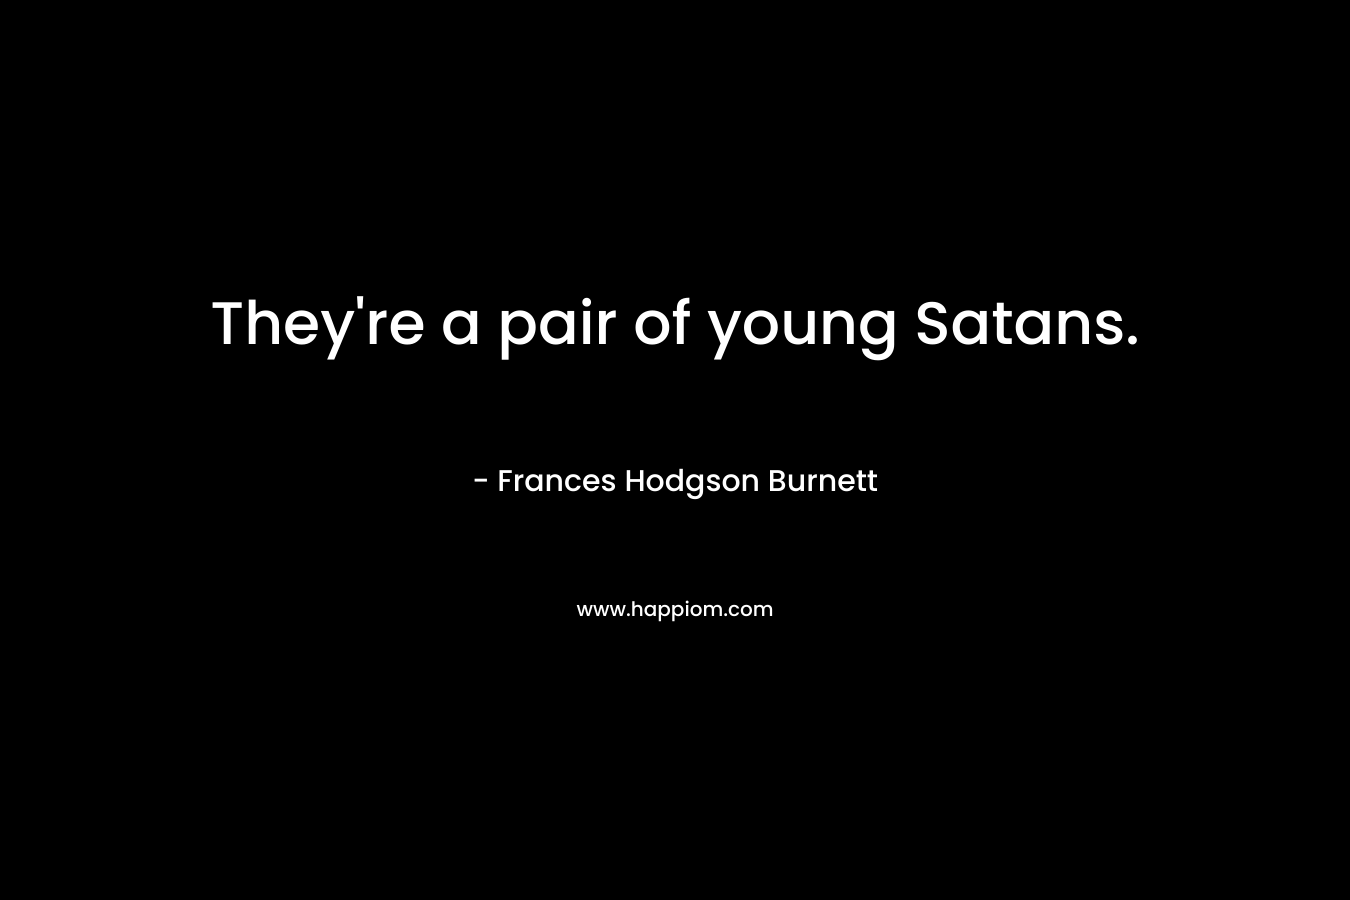 They're a pair of young Satans.